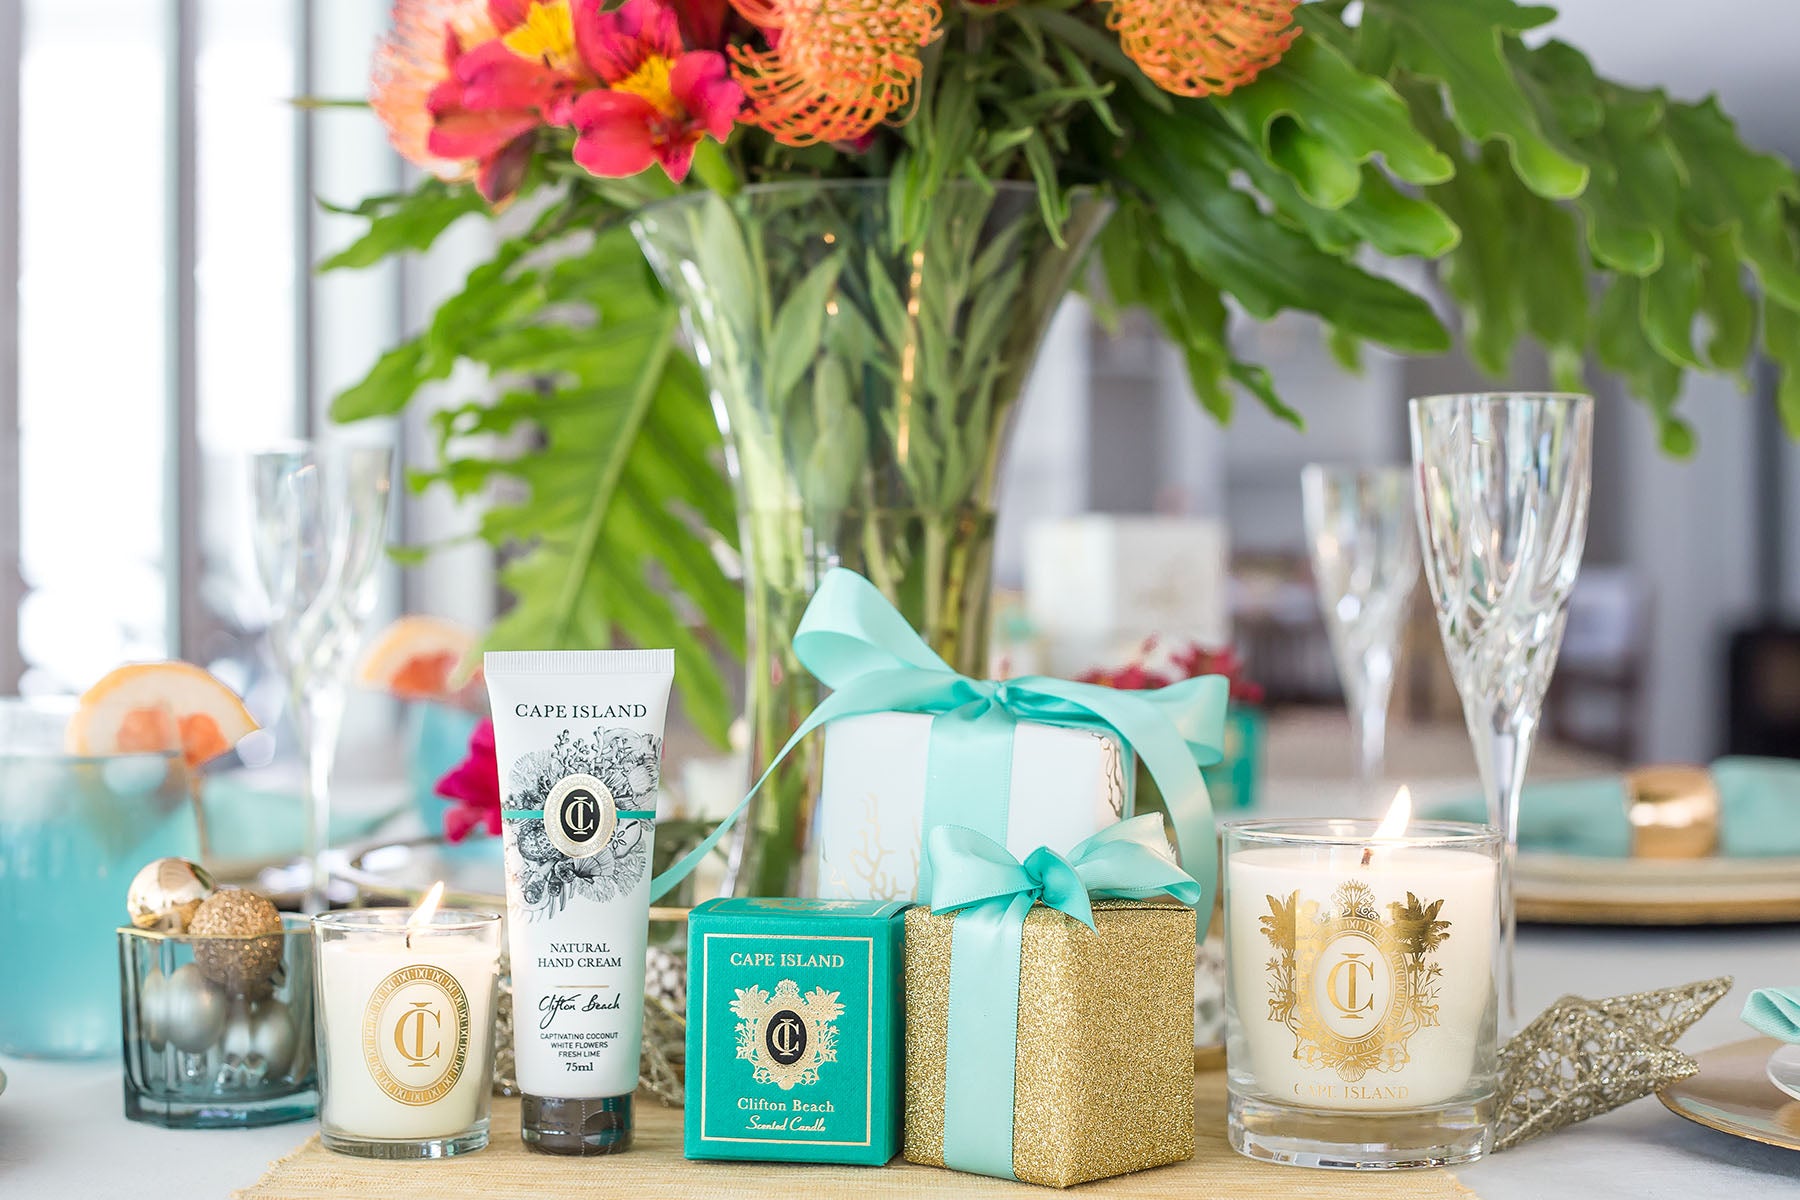 The Cape Island Clifton Beach candles. Cape Island luxury candles, soap products and home fragrances are available at Sarza home goods and furniture store in Rye New York.